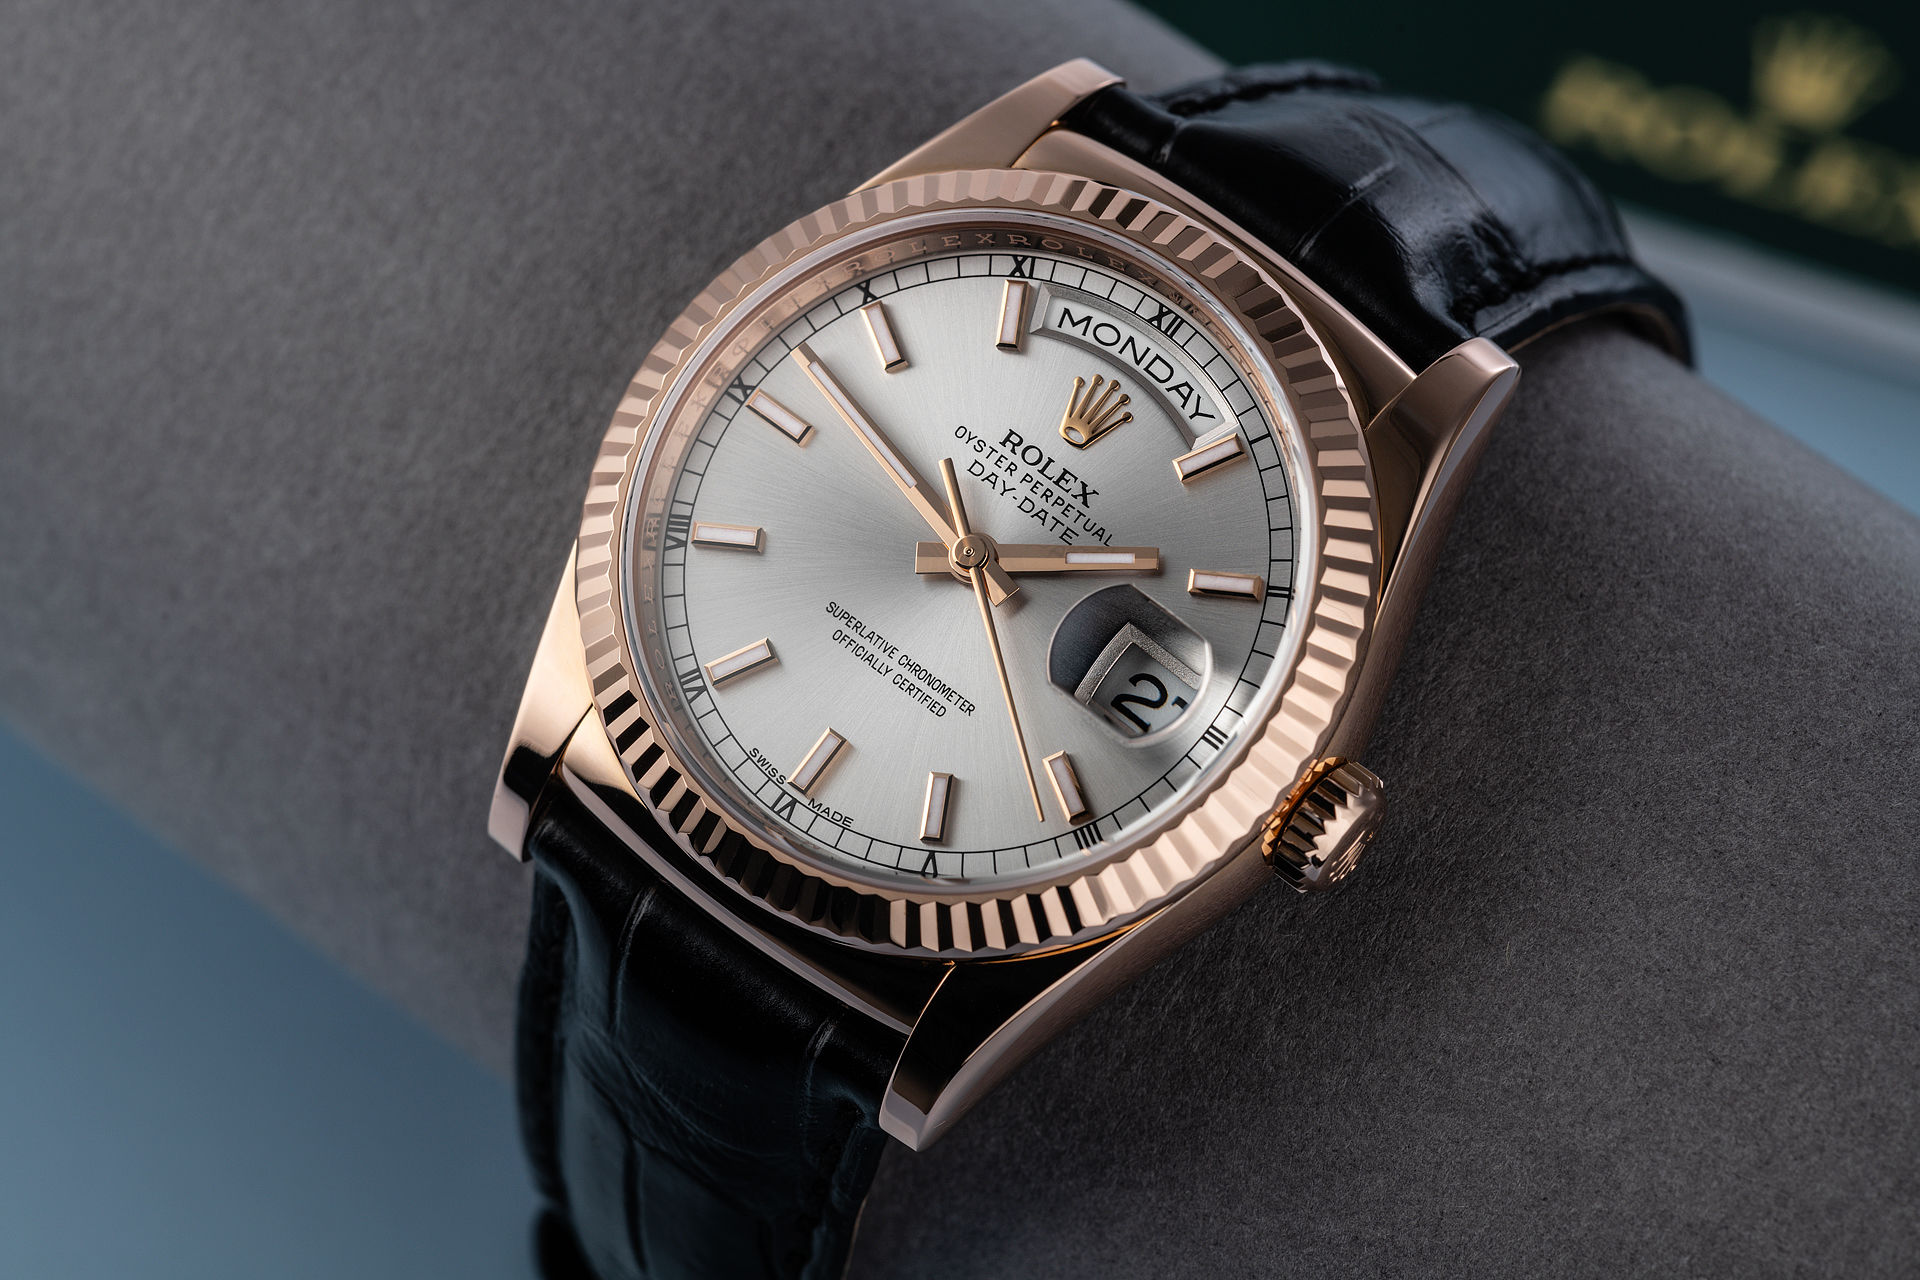 Everose Gold Box & Papers | ref 118135 | Rolex Day-Date